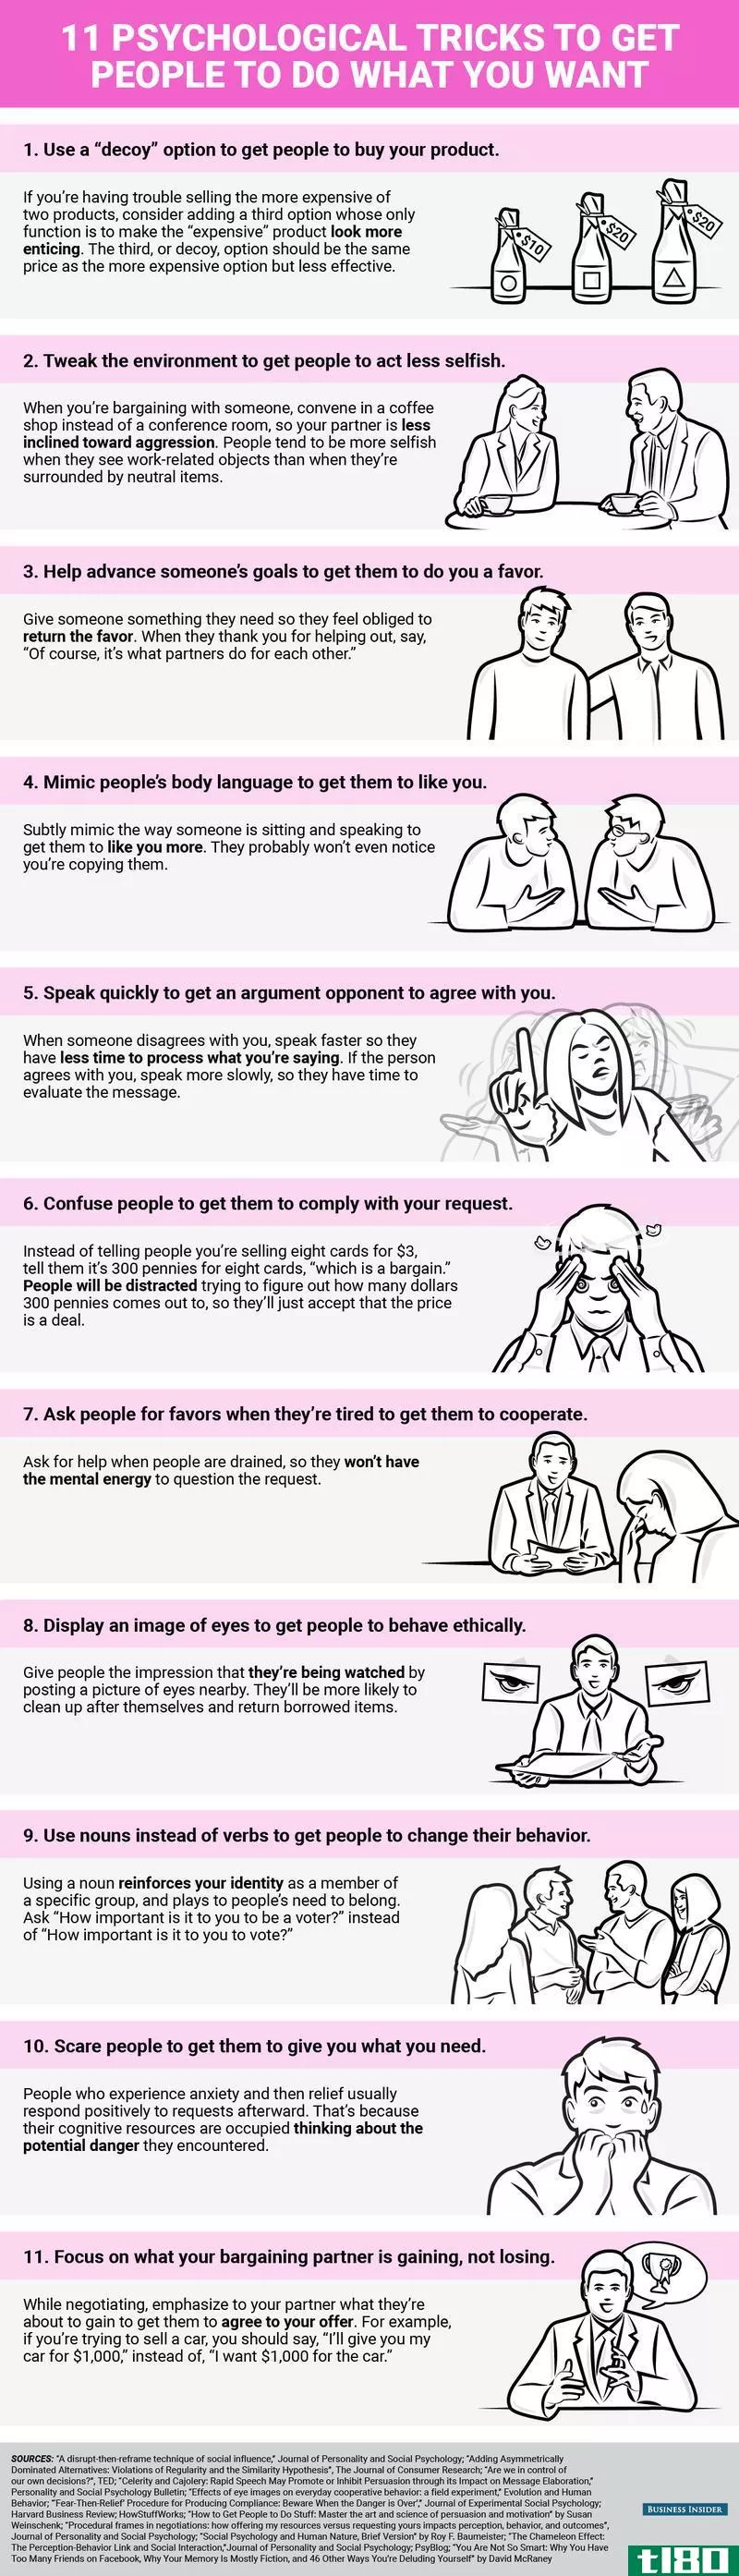 Illustration for article titled Get People to Do What You Want With These 11 Clever Psychological Tricks